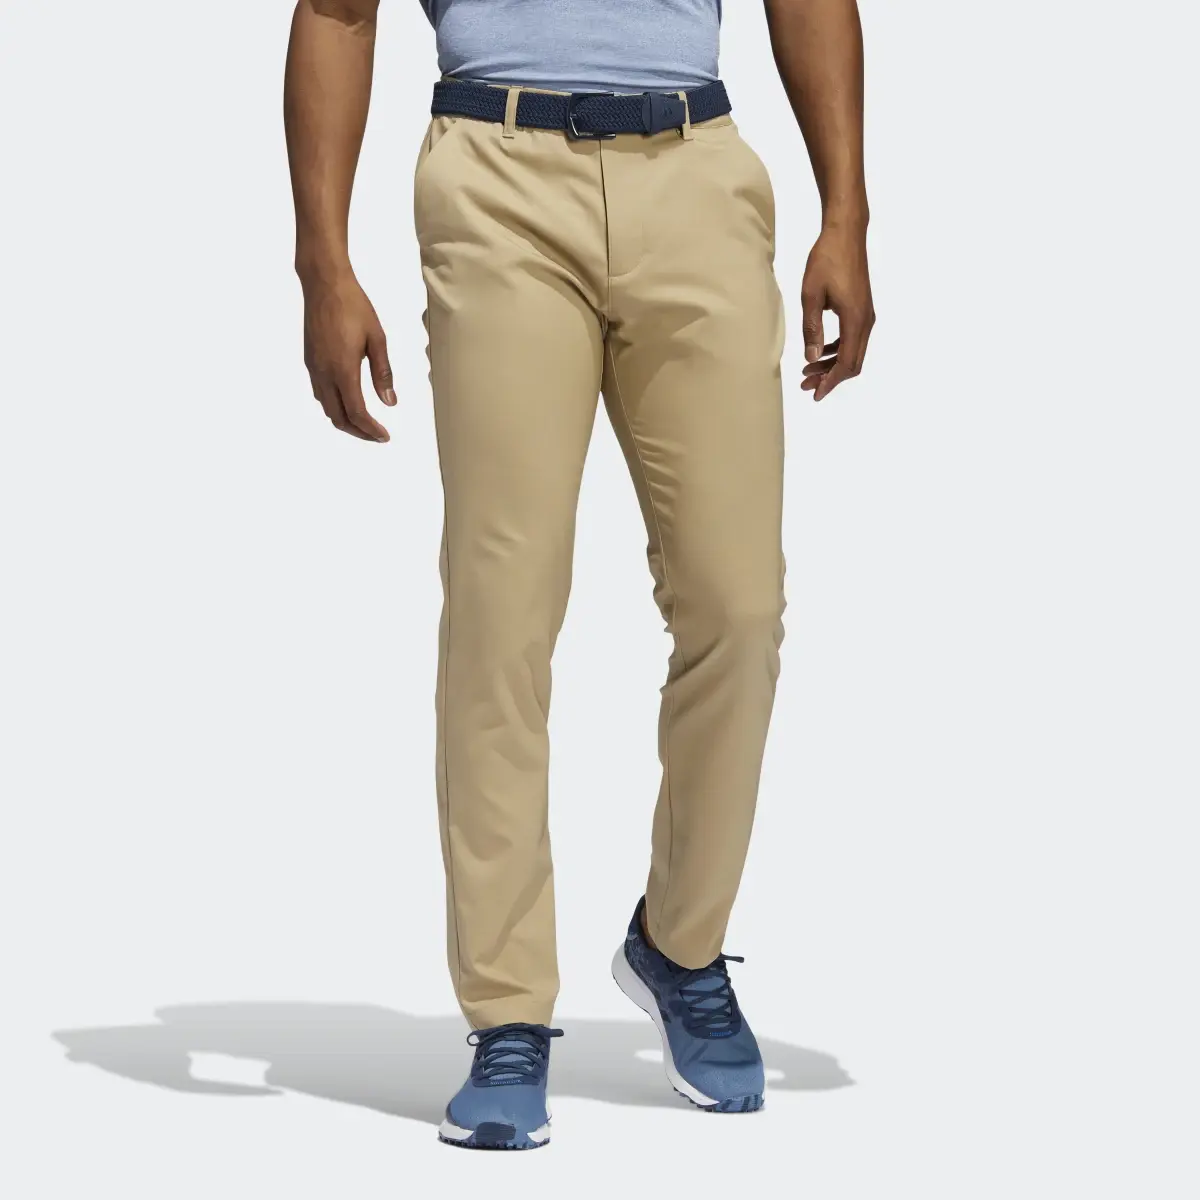 Adidas Ultimate365 Tapered Pants. 1